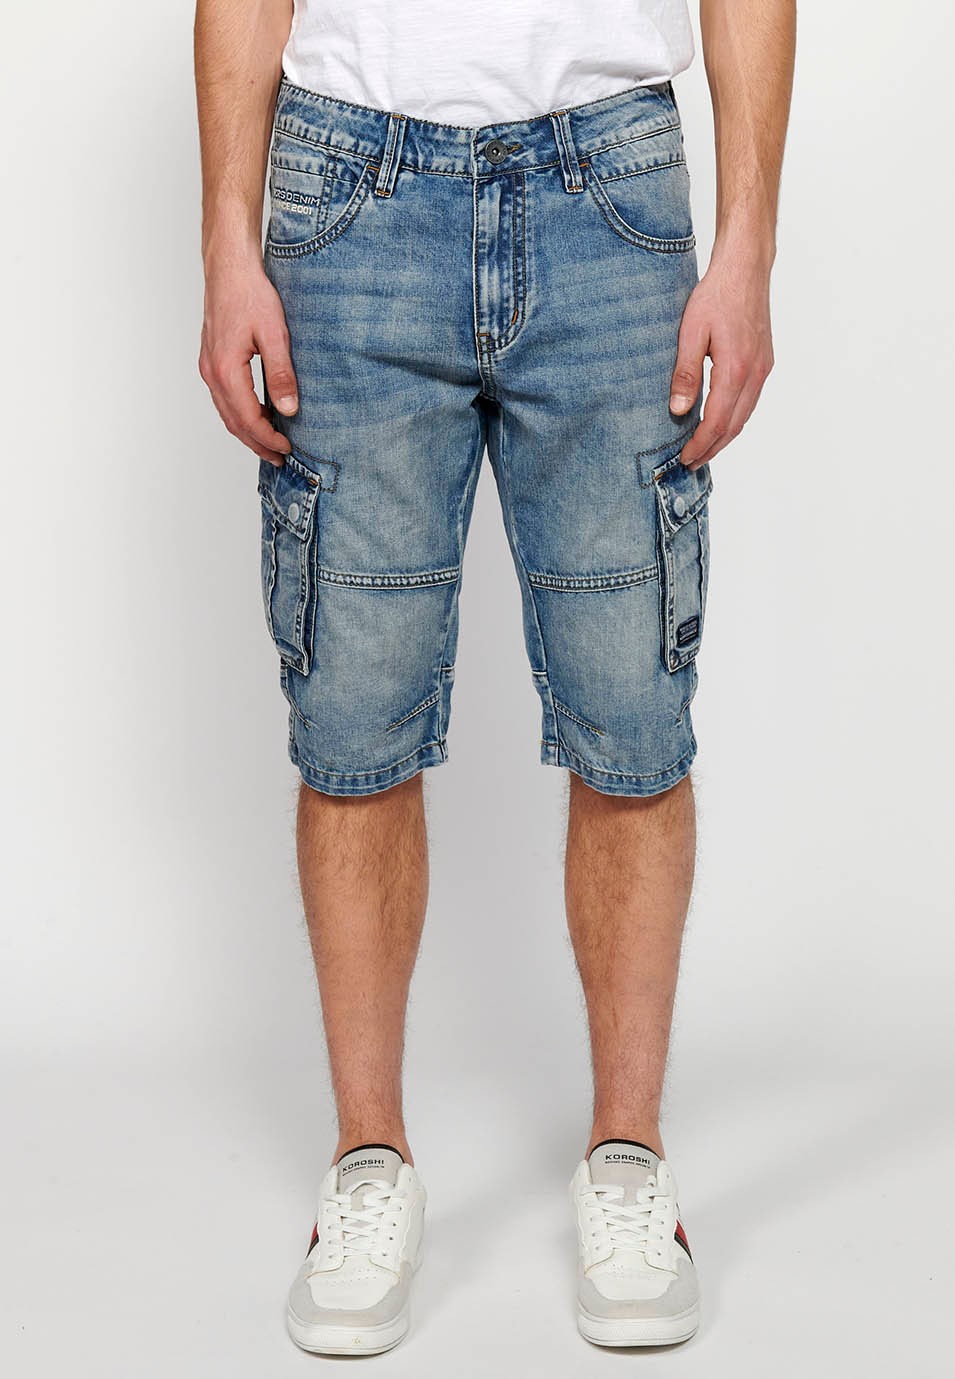 Denim Bermuda cargo shorts with front zipper and button closure with five pockets, one ticket pocket and two light blue sides, for Men 3